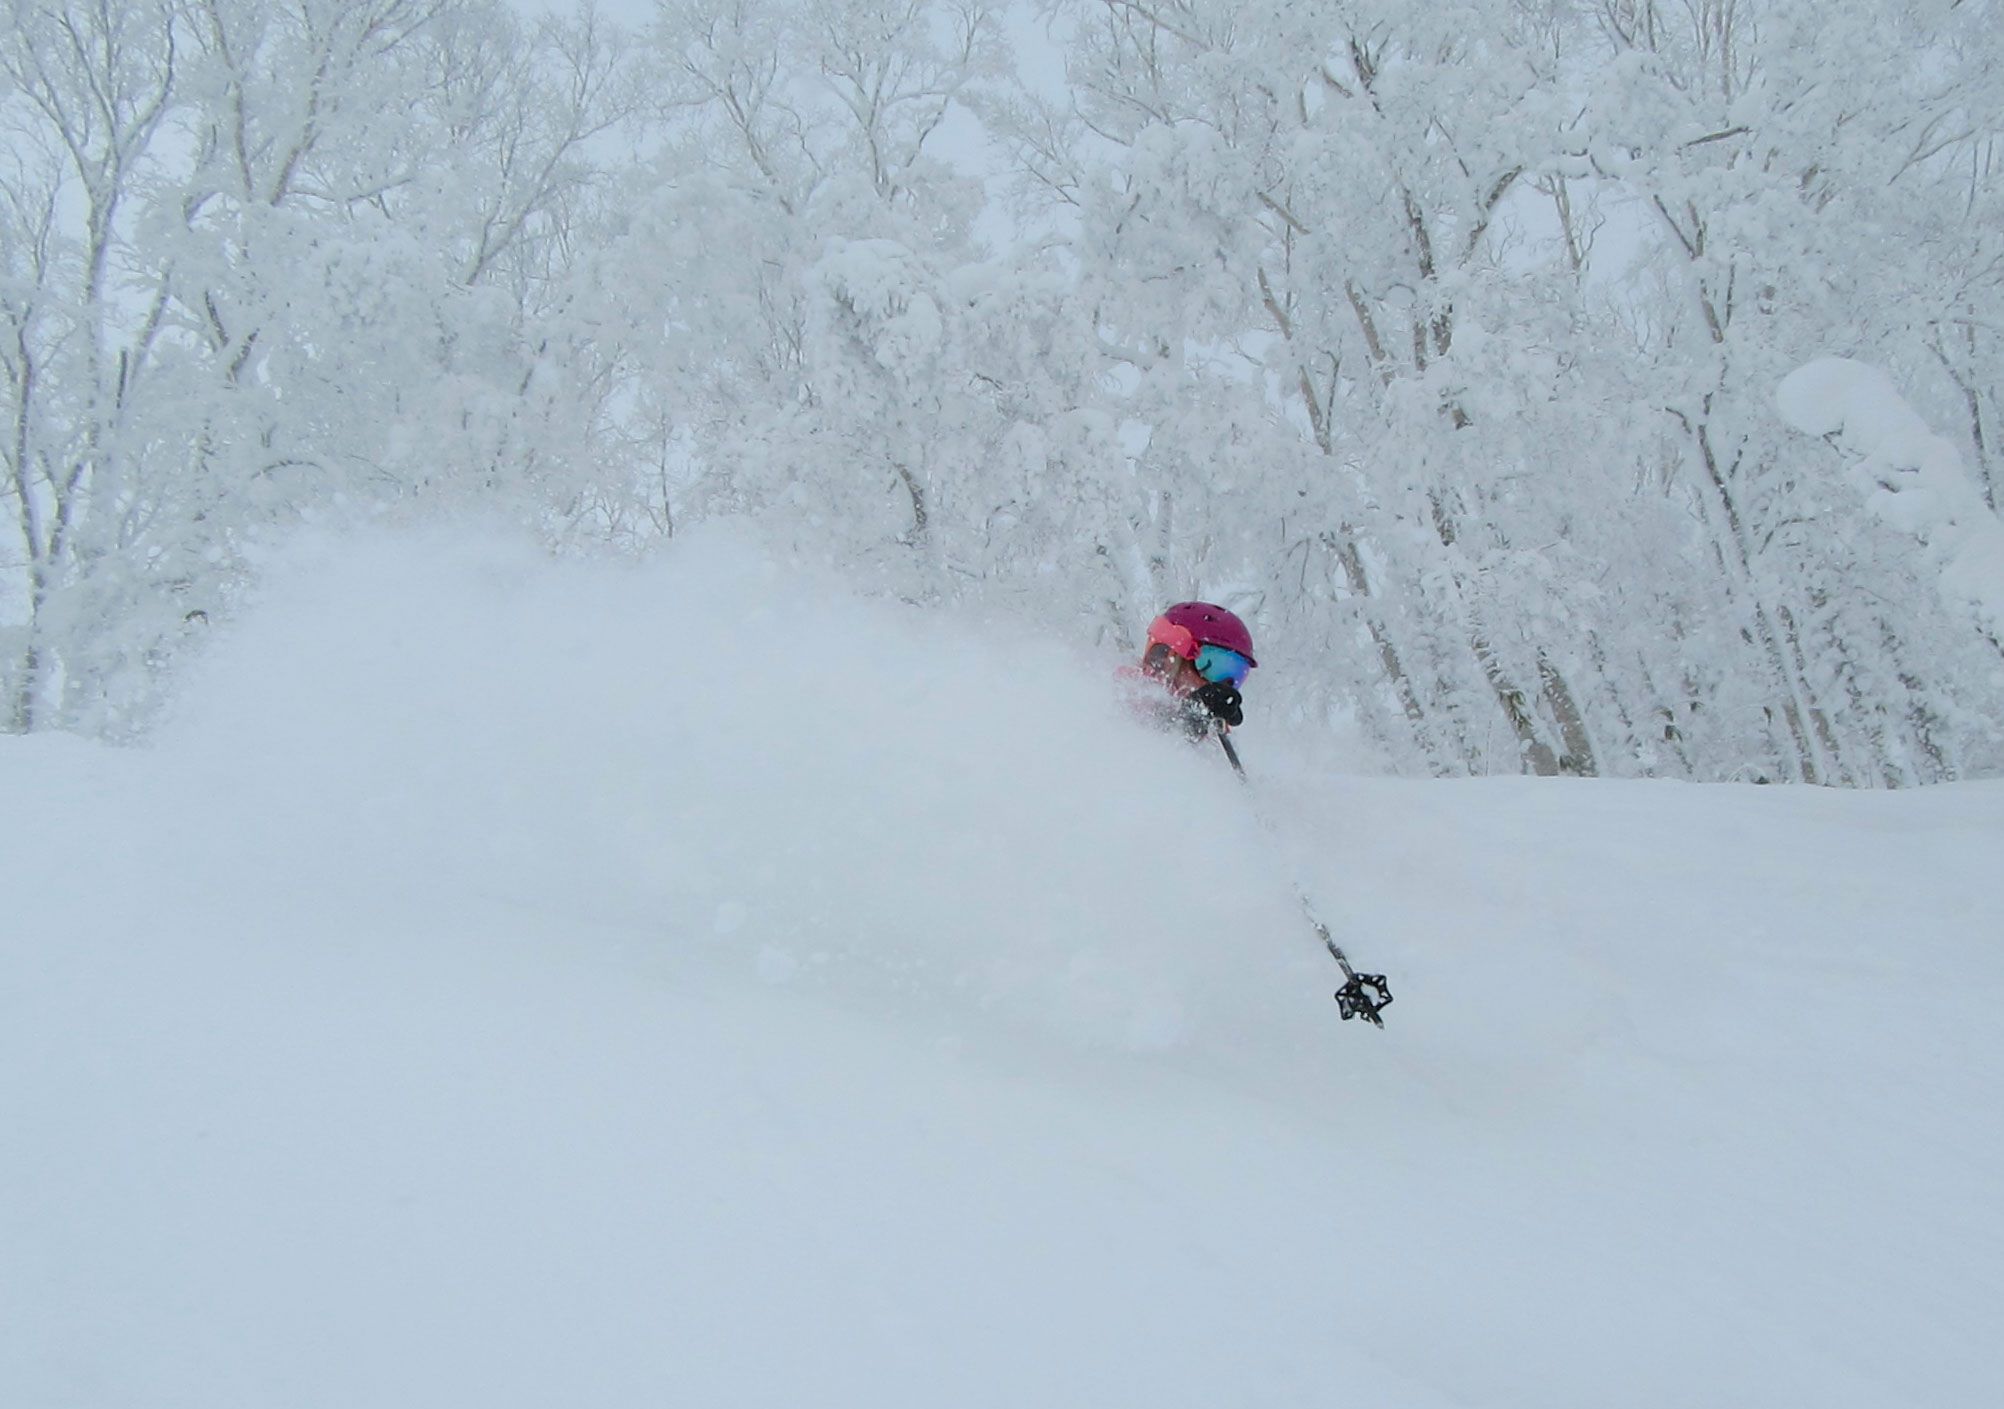 Powder on offer in the side country